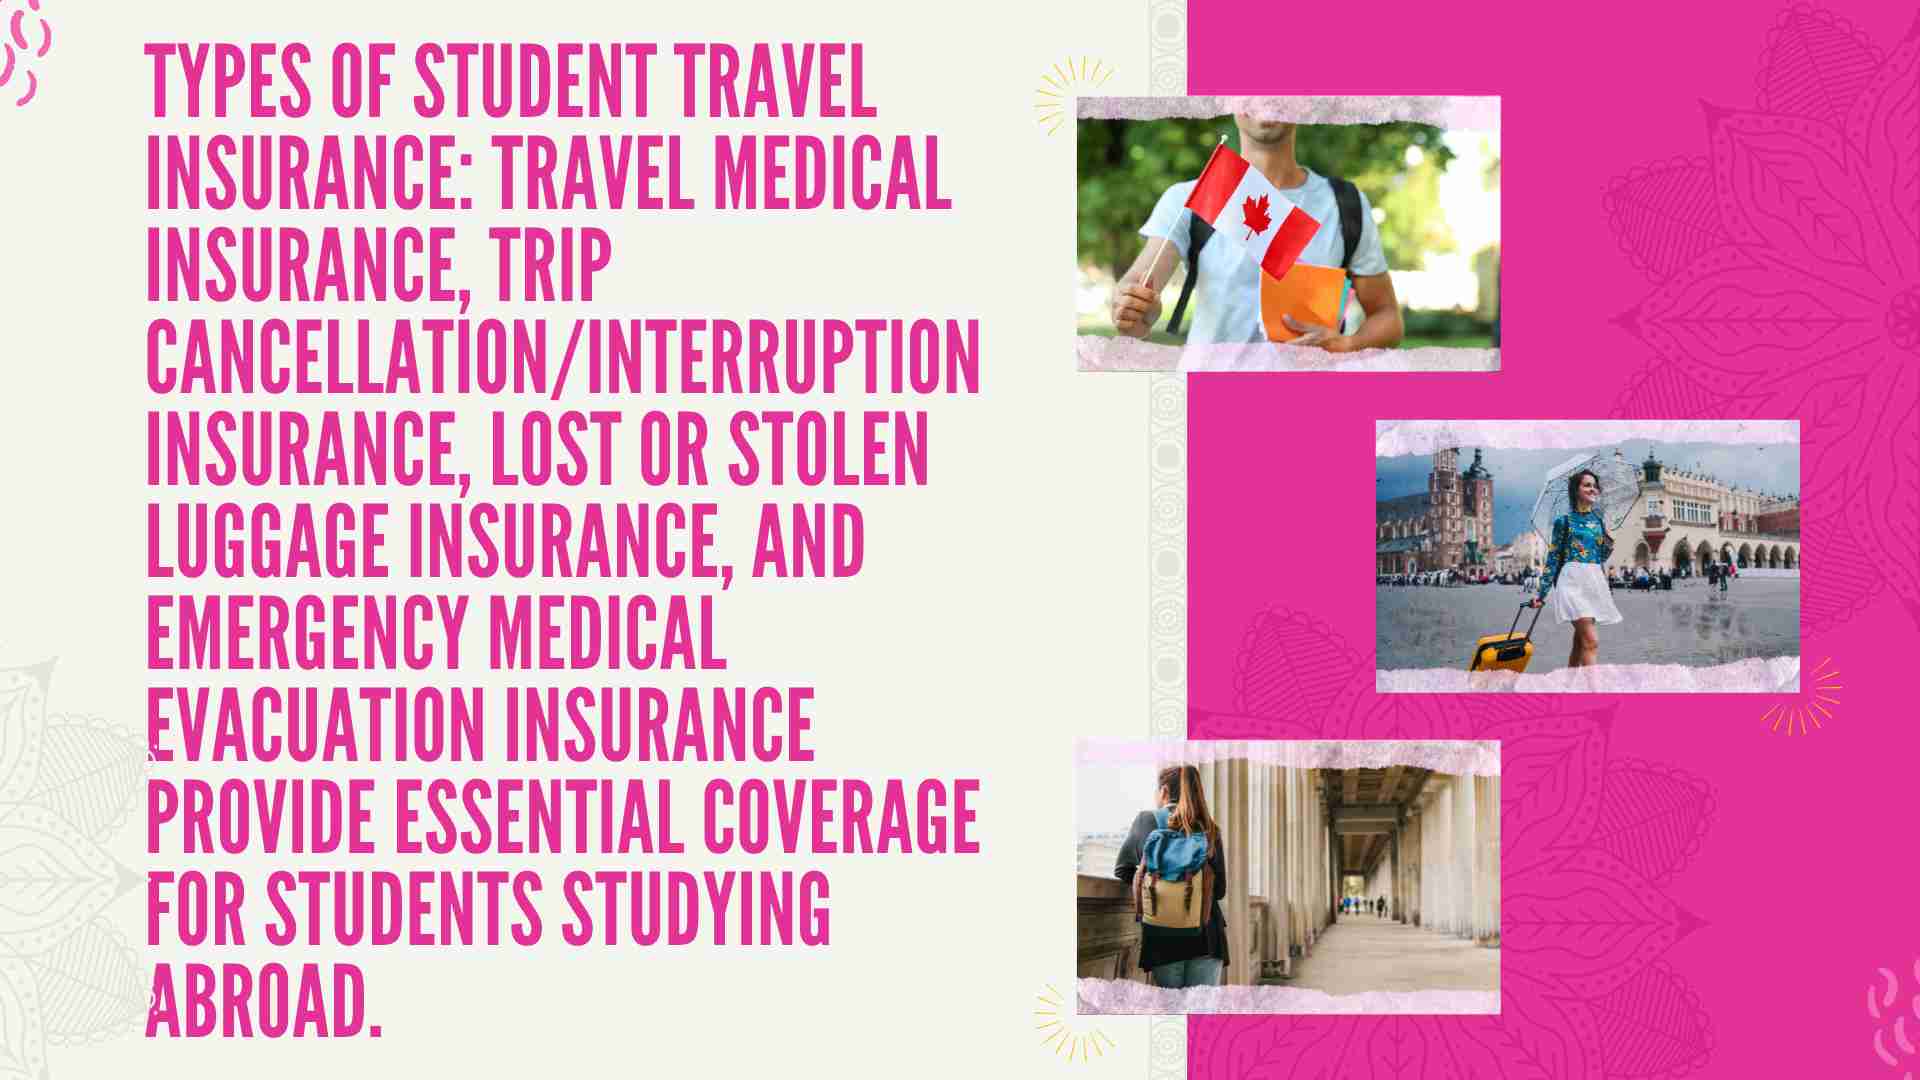 Types of Student Travel Insurance